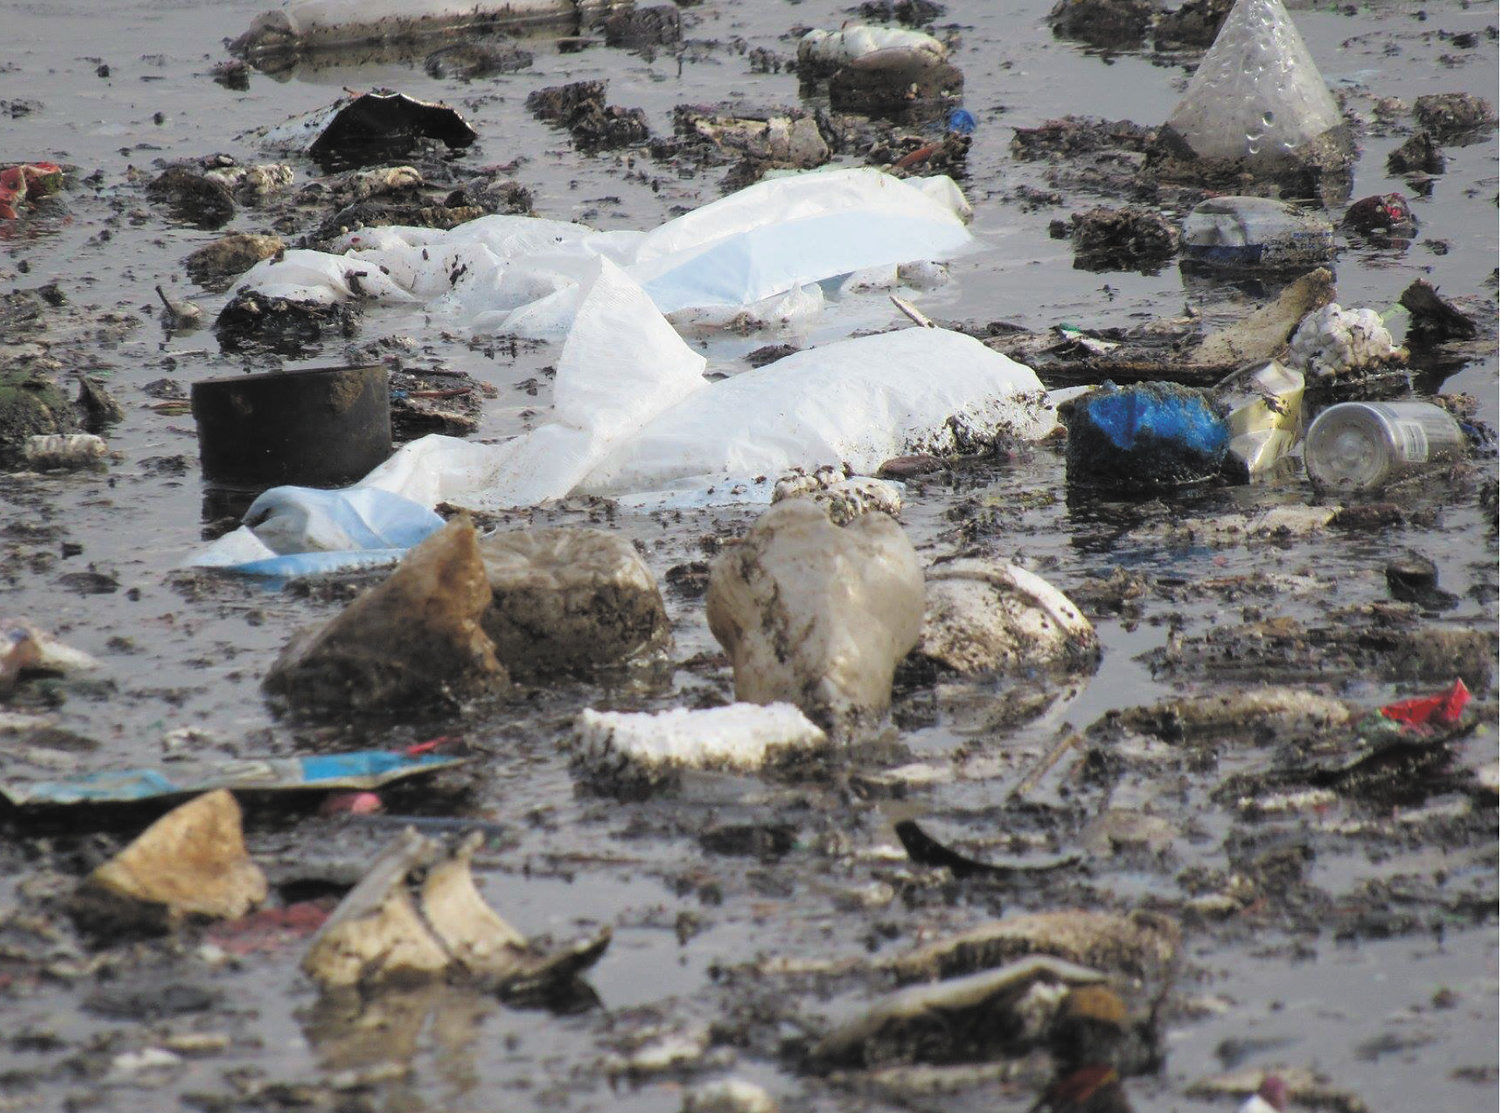 Trash in Lake Hiawatha includes various types of plastic and styrofoam. (Photo submitted by Friends of Lake Hiawatha)